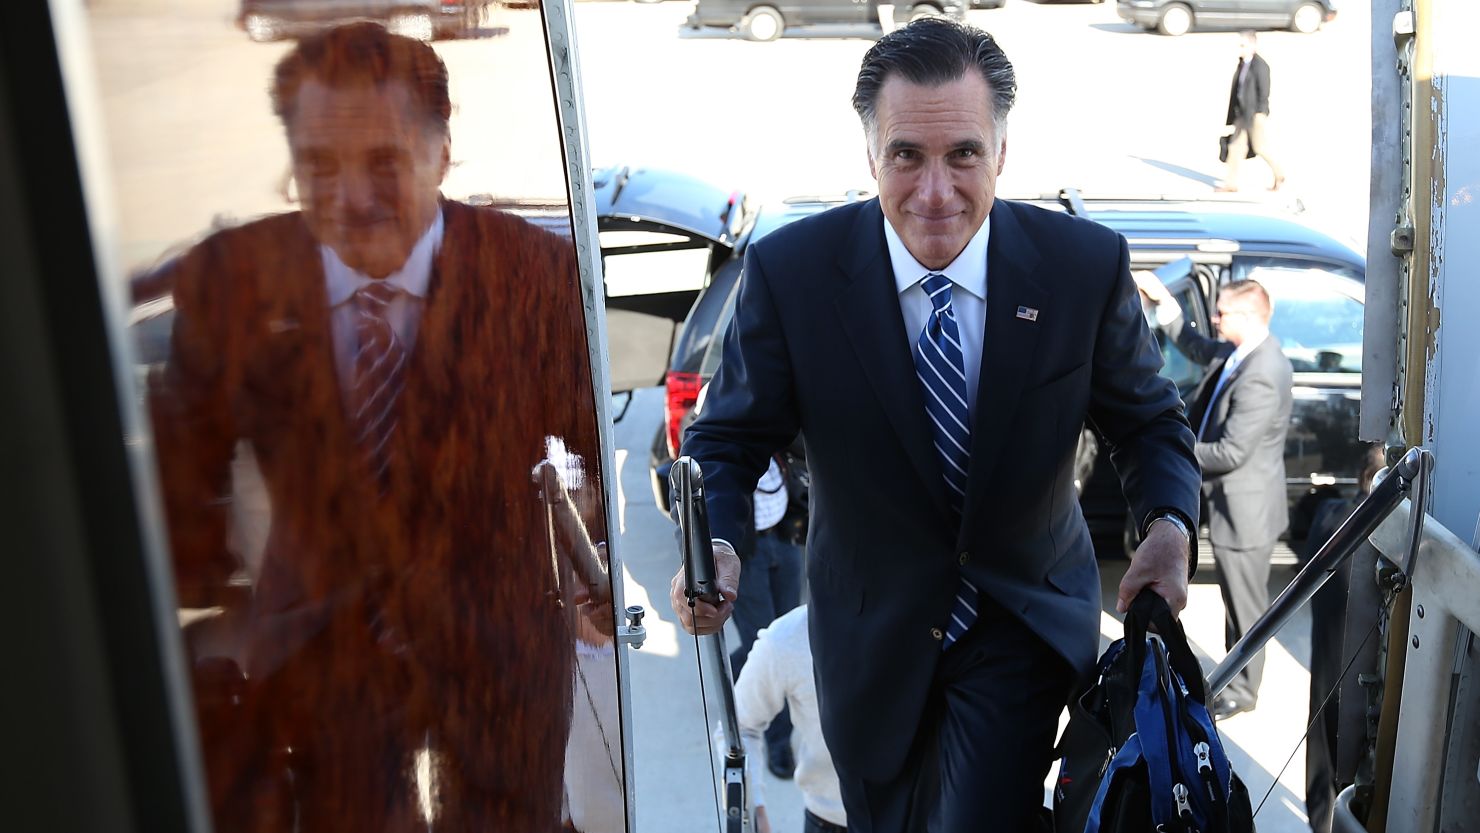  Republican presidential candidate Mitt Romney boards his campaign plane on November 2 in Milwaukee.